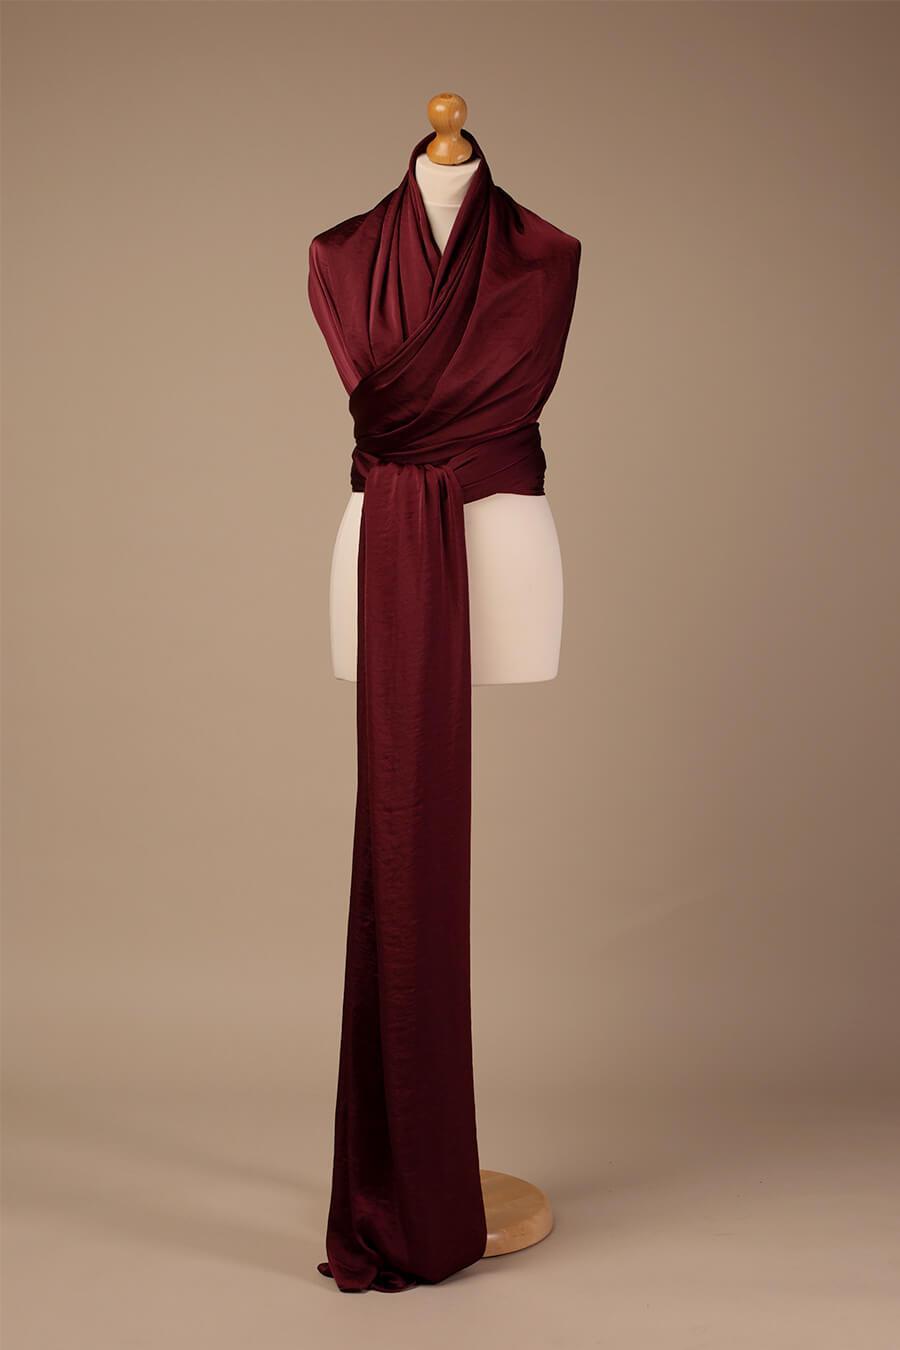 A stand with a silky scarf bordeaux wrapped around it like a dress